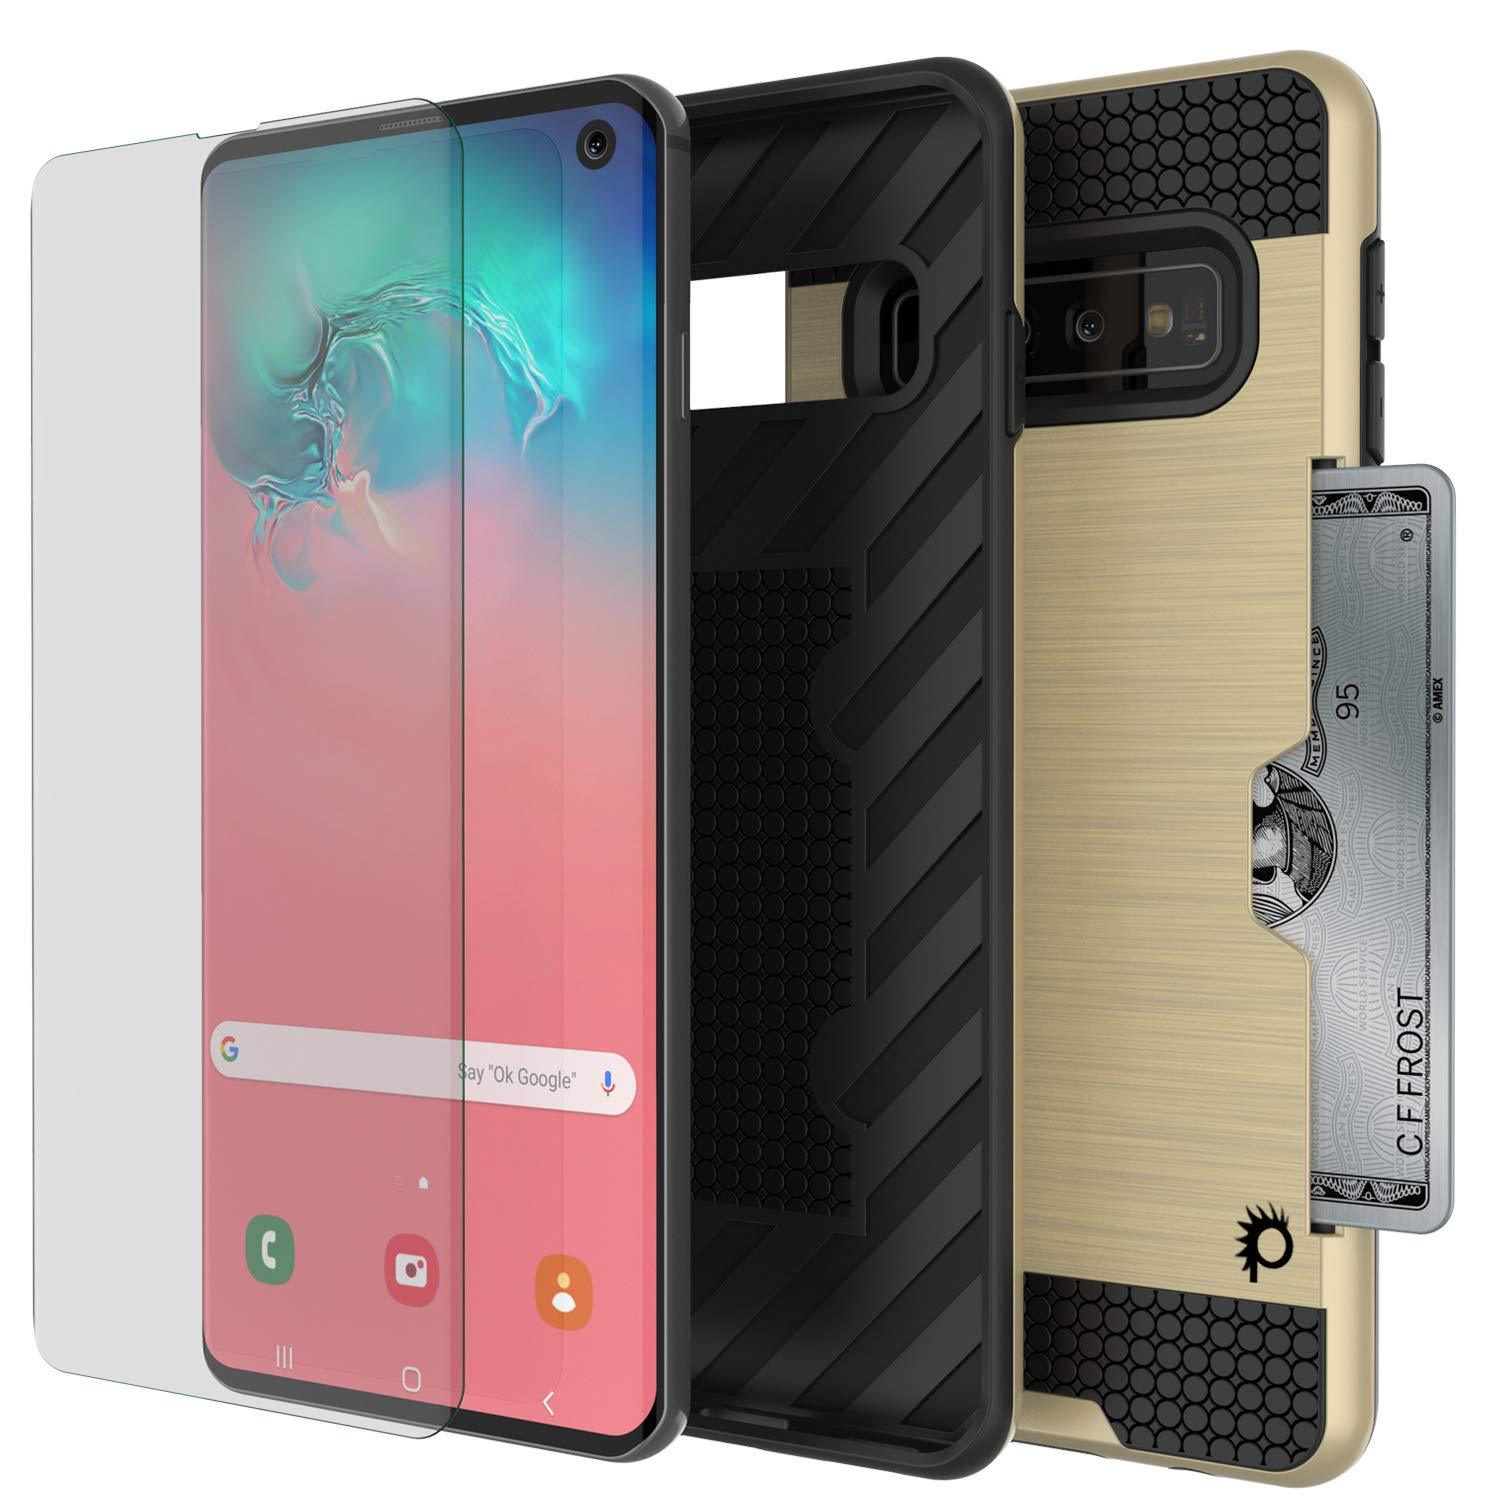 Galaxy S10e Case, PUNKcase [SLOT Series] [Slim Fit] Dual-Layer Armor Cover w/Integrated Anti-Shock System, Credit Card Slot [Gold]